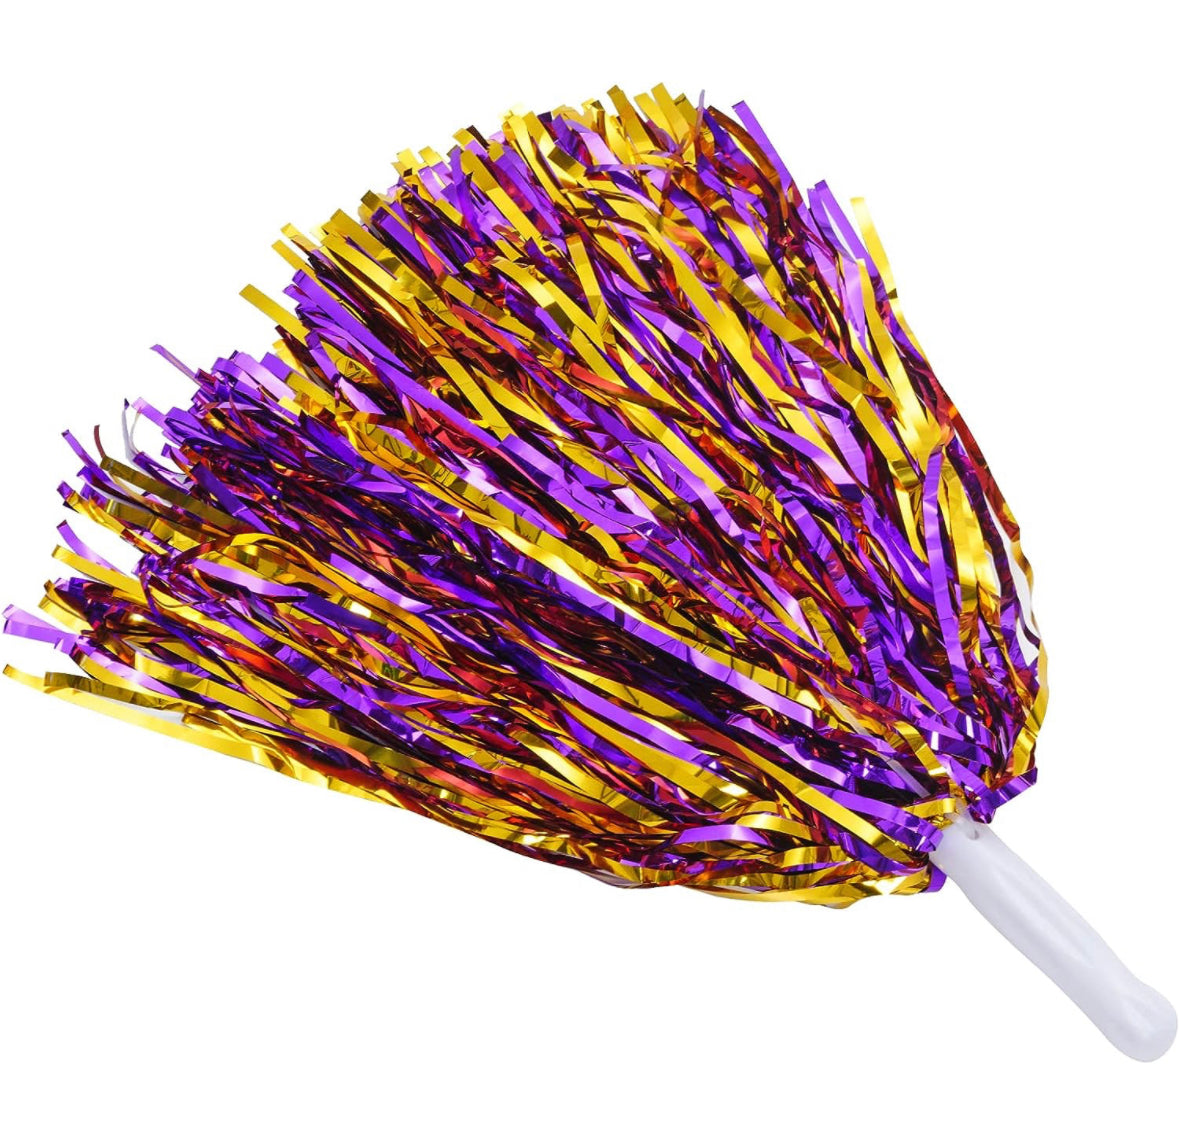 An Amazon Game Day PomPoms on a white background.